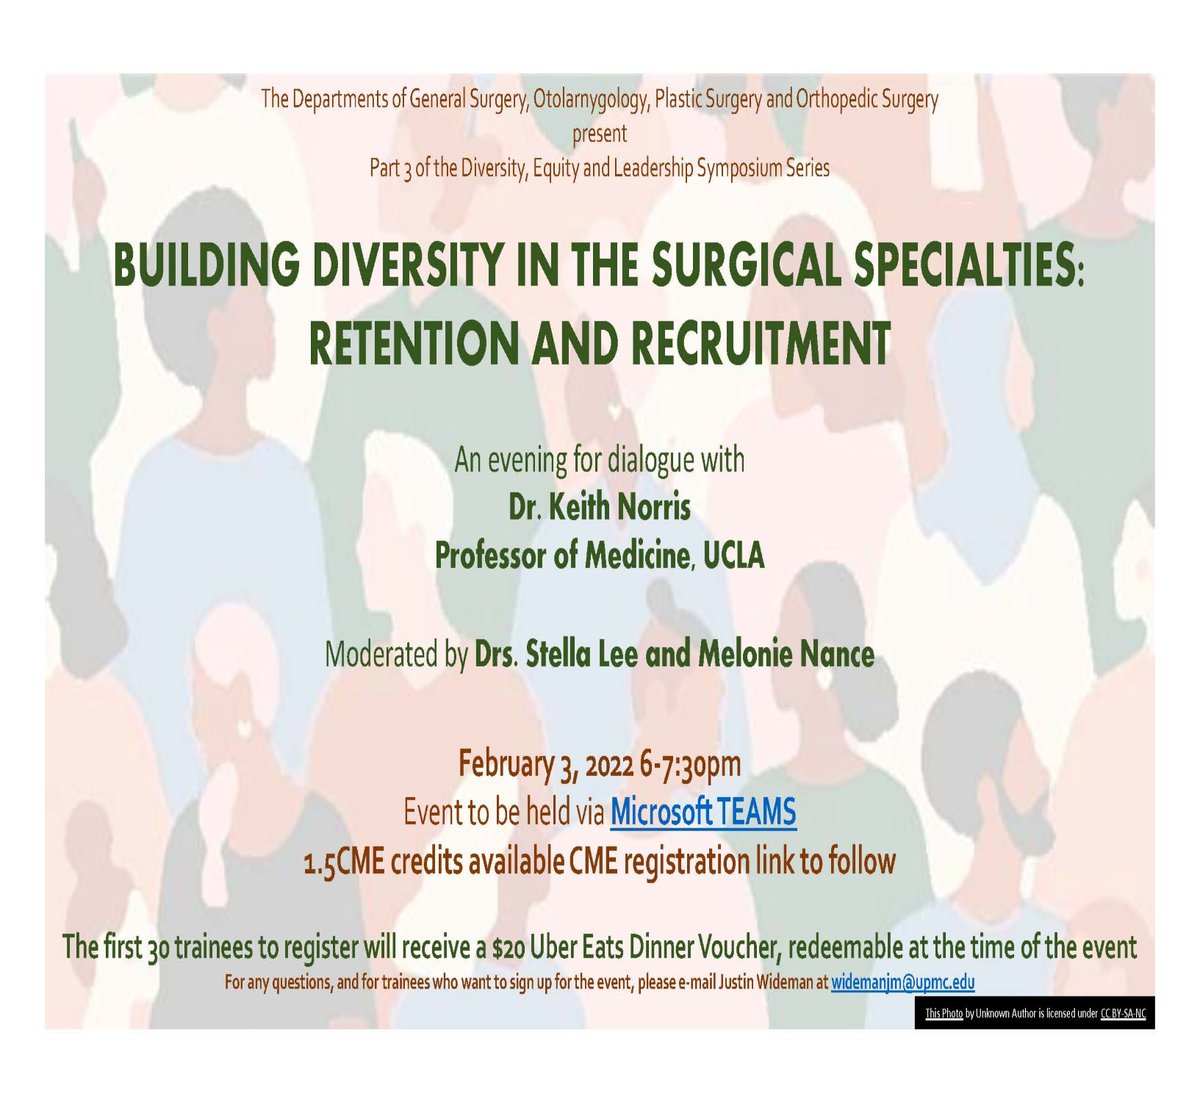 Please join us for a timely discussion on building Diversity in Surgical Specialties: Retention and Recruitment. Please email widemanjm@upmc.edu for registration/link instructions. We look forward to “seeing” you. #diversity #equity #inclusion #minoritiesinmedicine